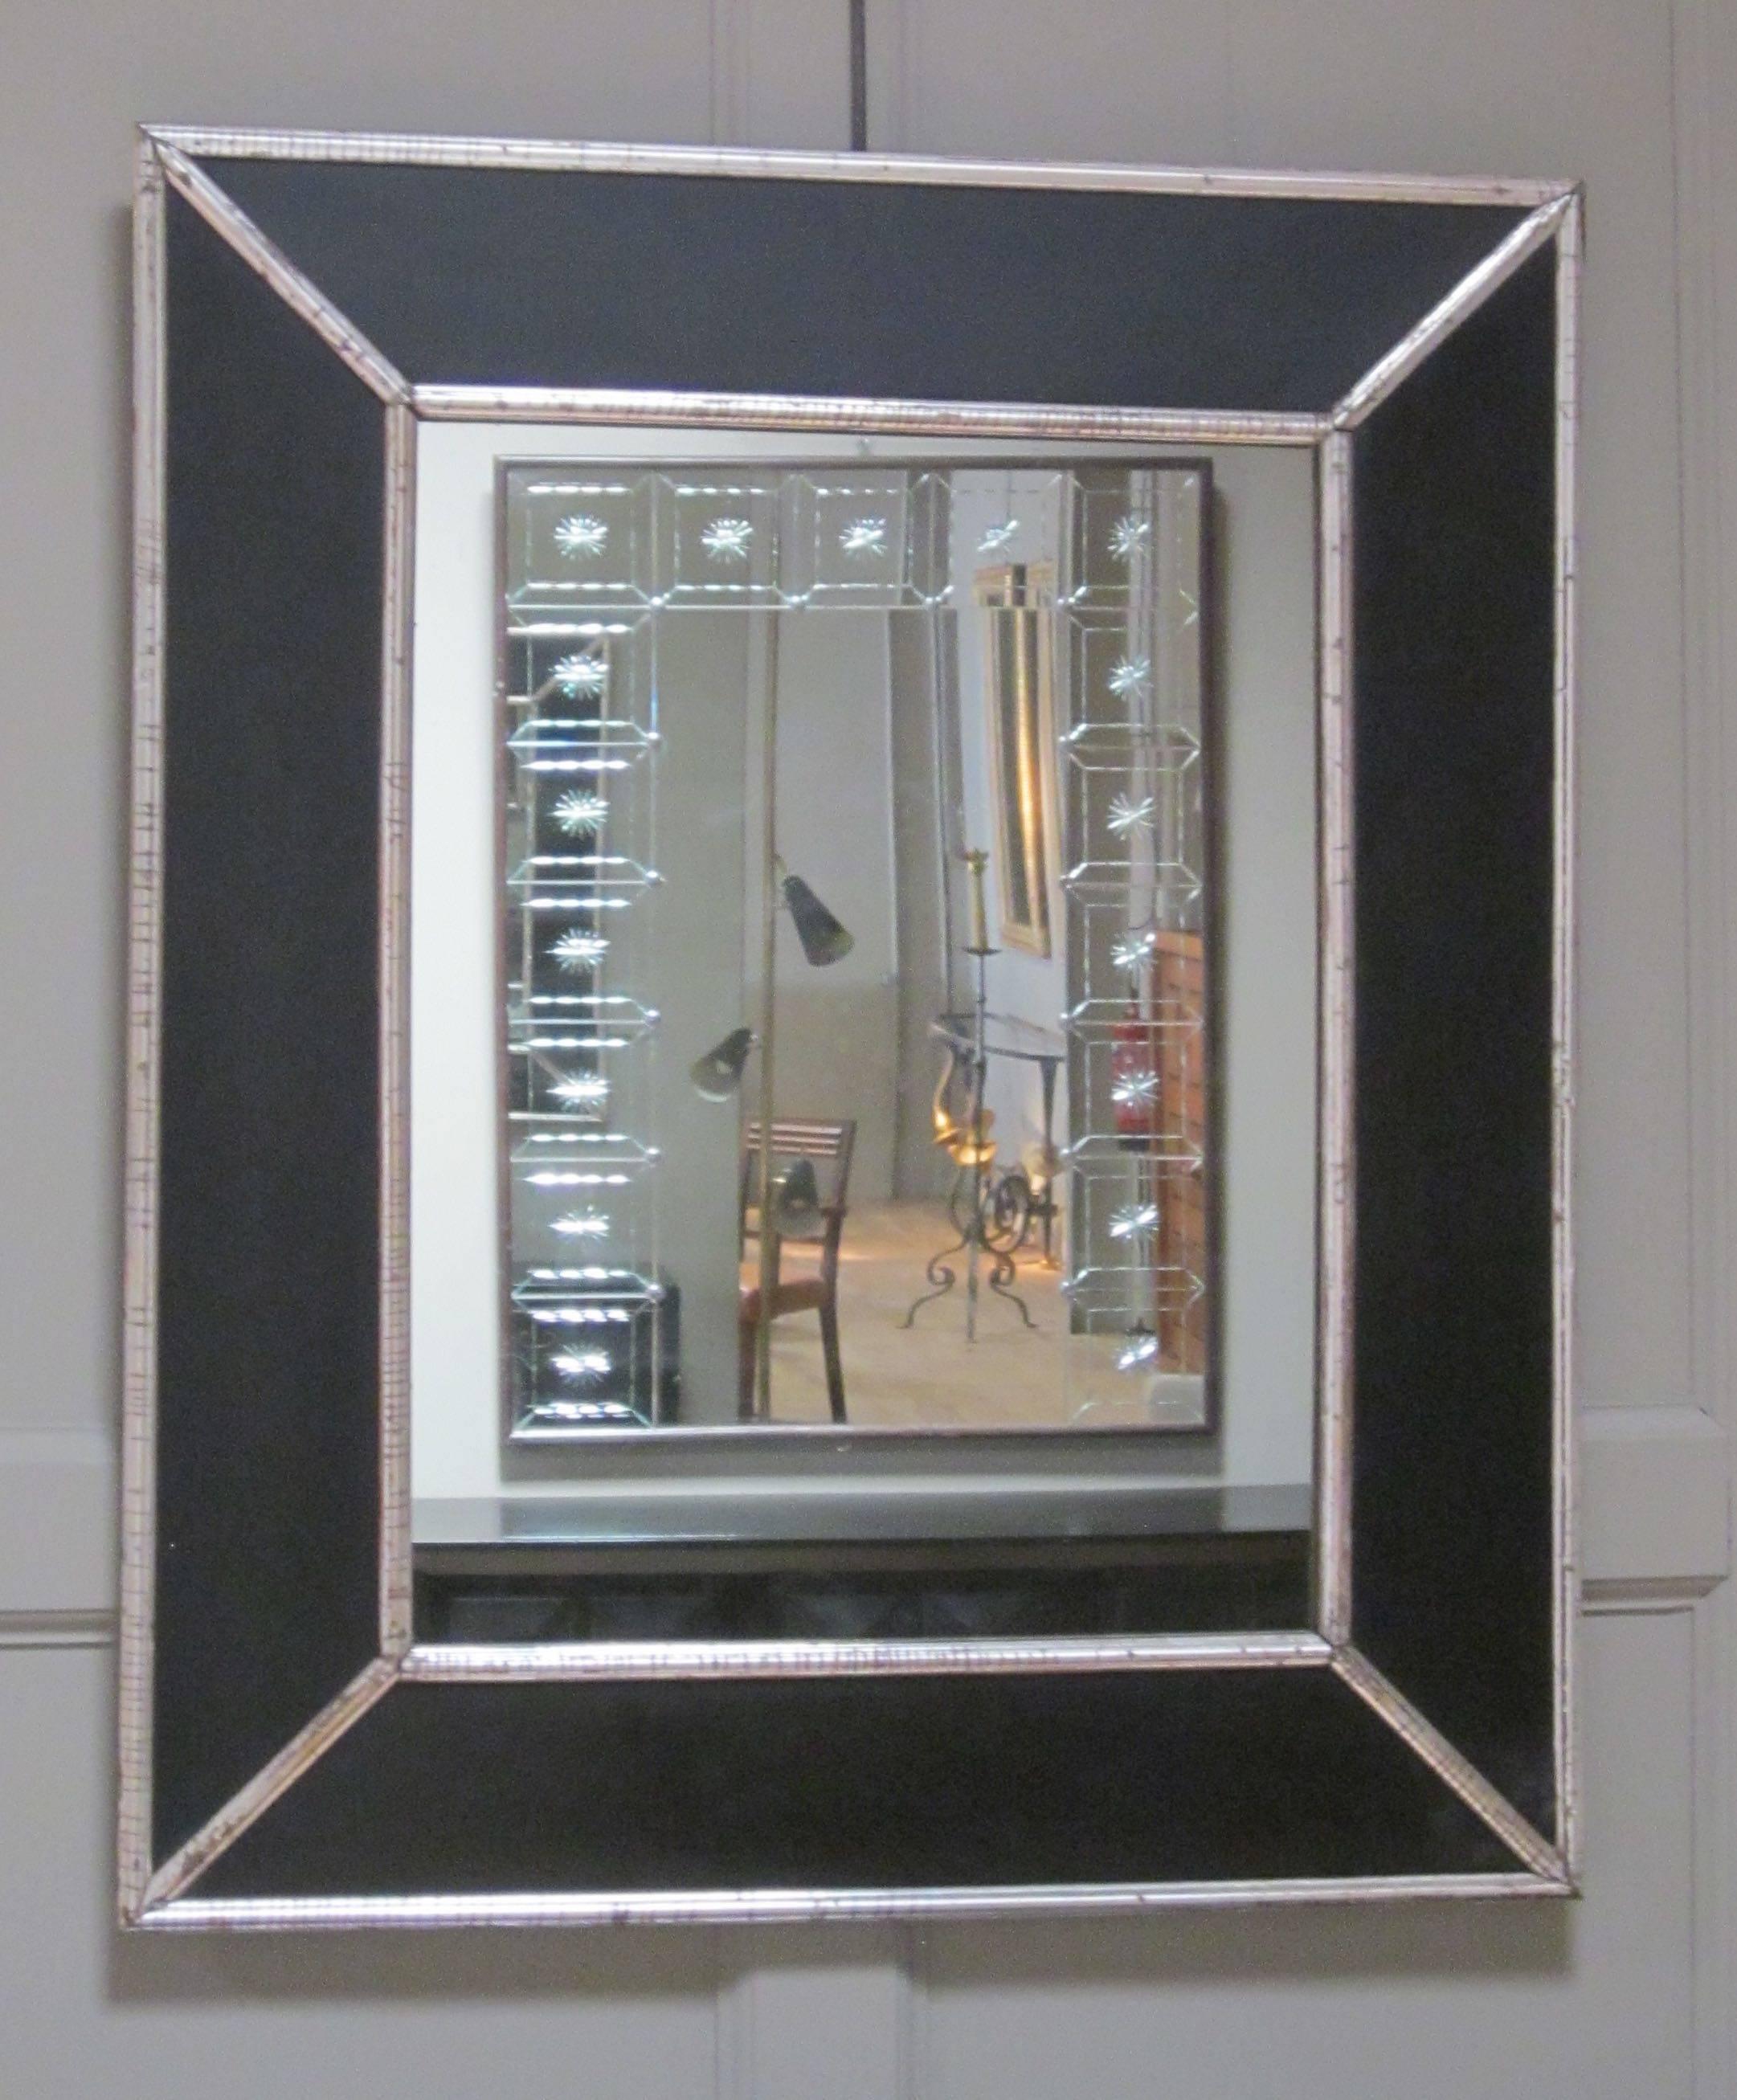 French 19th century black frame mirror with silver borders and mitered trim.
Black wood frame is trimmed in silver outlining the inside and outside of the frame and mitered corners.